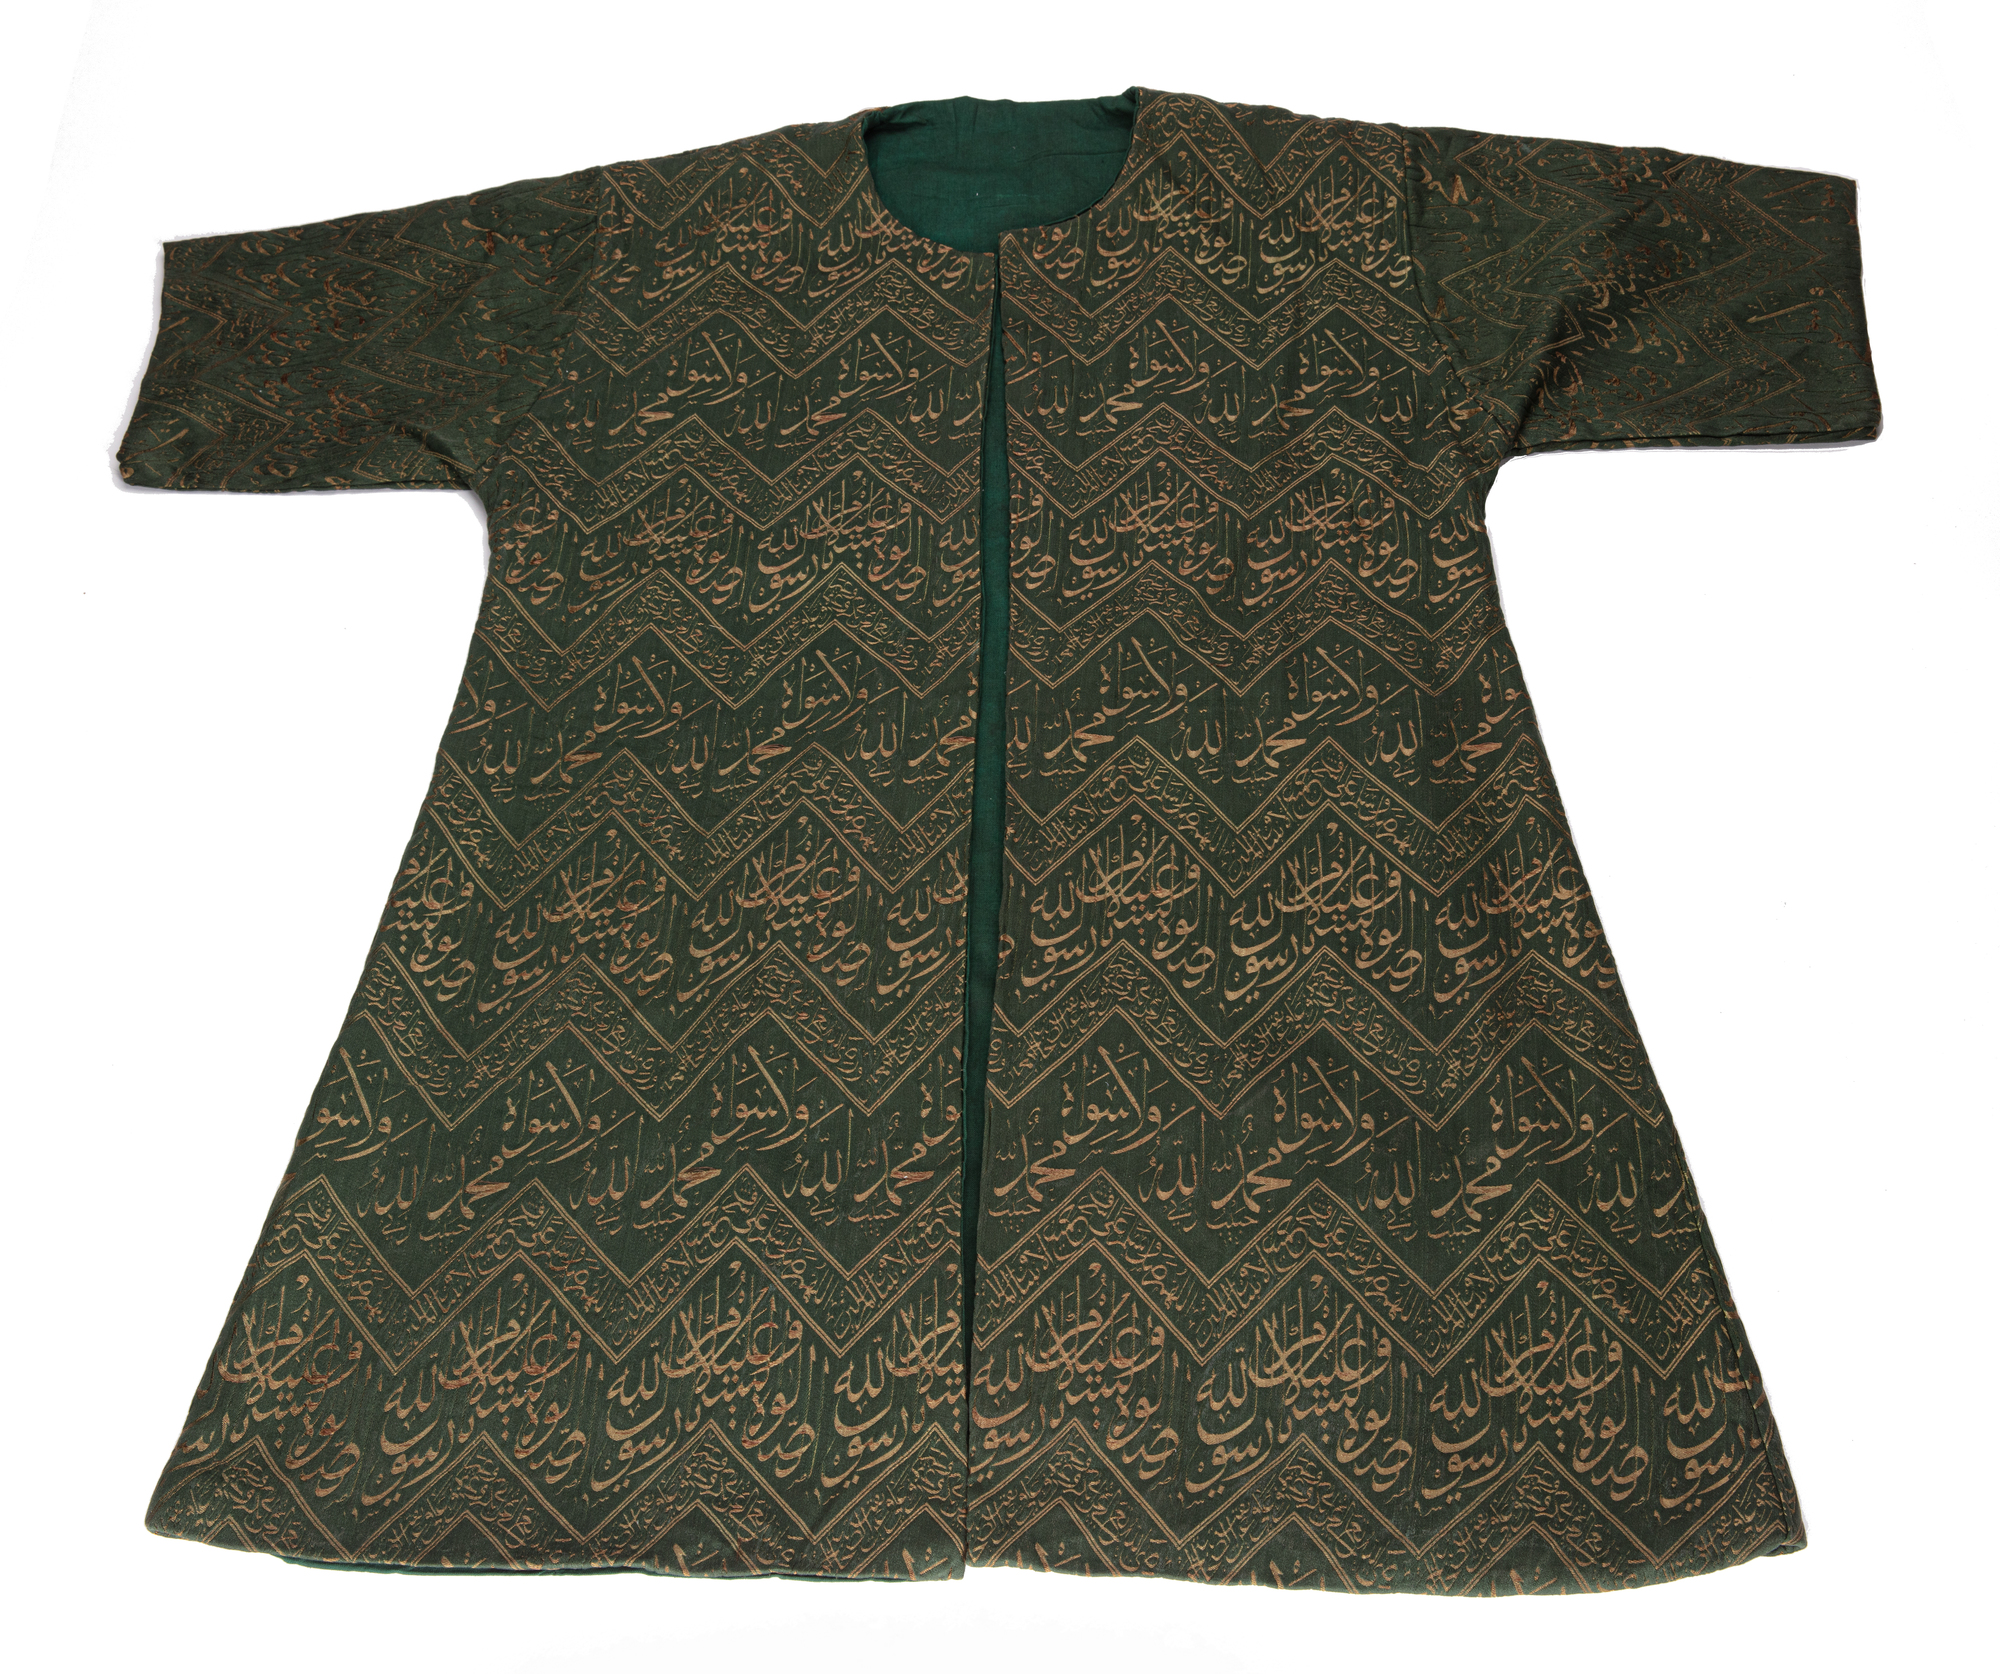 AN OTTOMAN LAMPAS-WEAVE TUNIC MADE FROM A CENOTAPH COVER, TURKEY, LATE 19TH CENTURY - Image 2 of 2